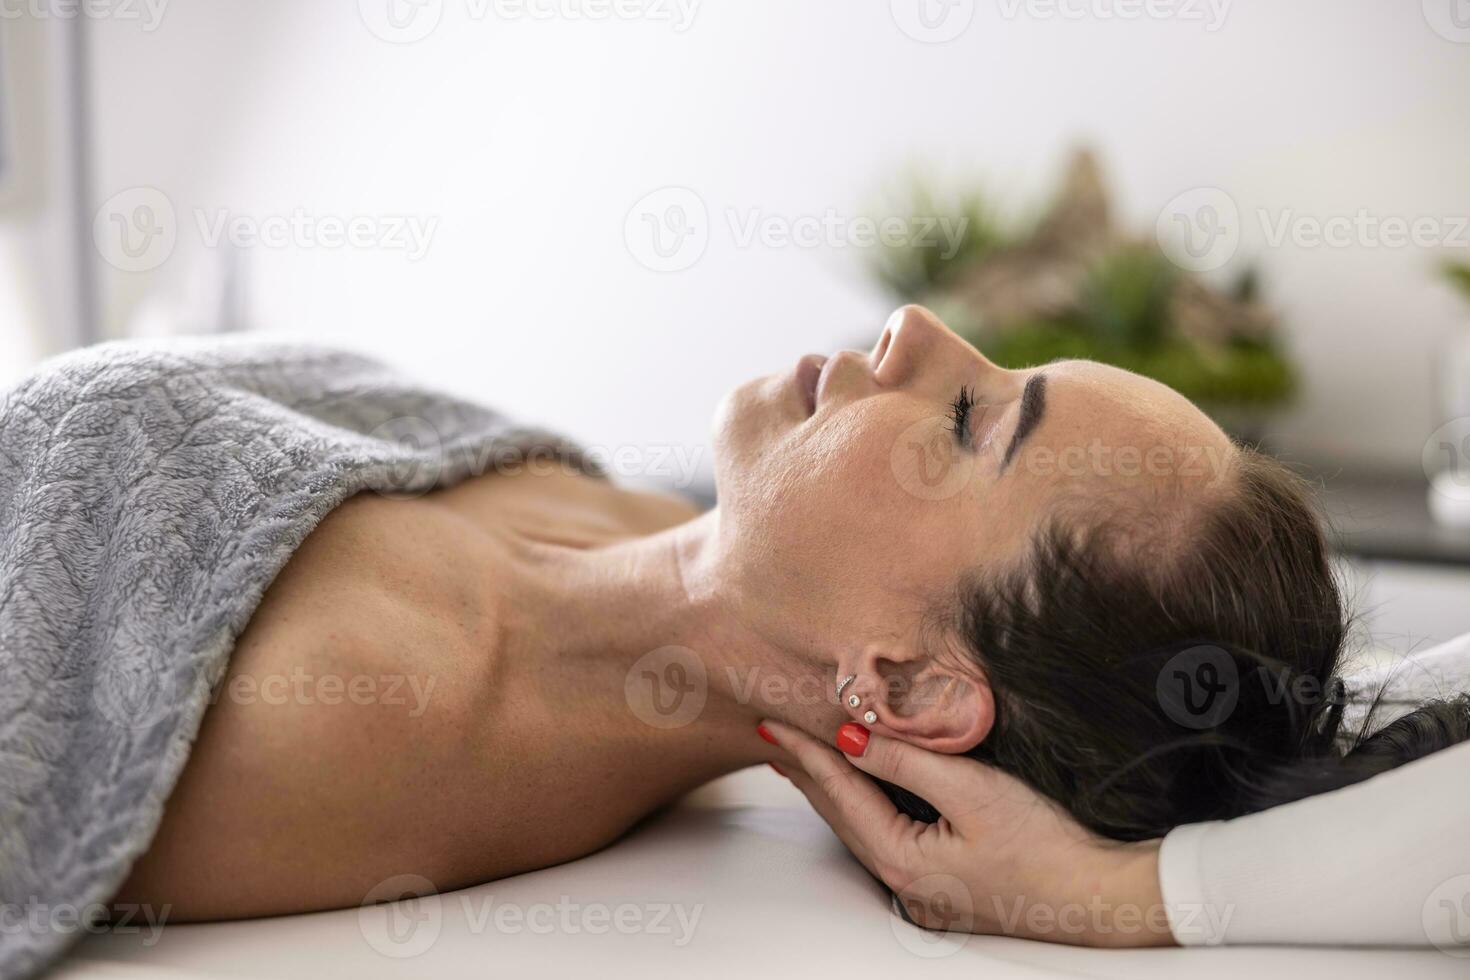 Masseuse finishes her massage with gentle touches easing tension from moscles at the back of her client's head photo